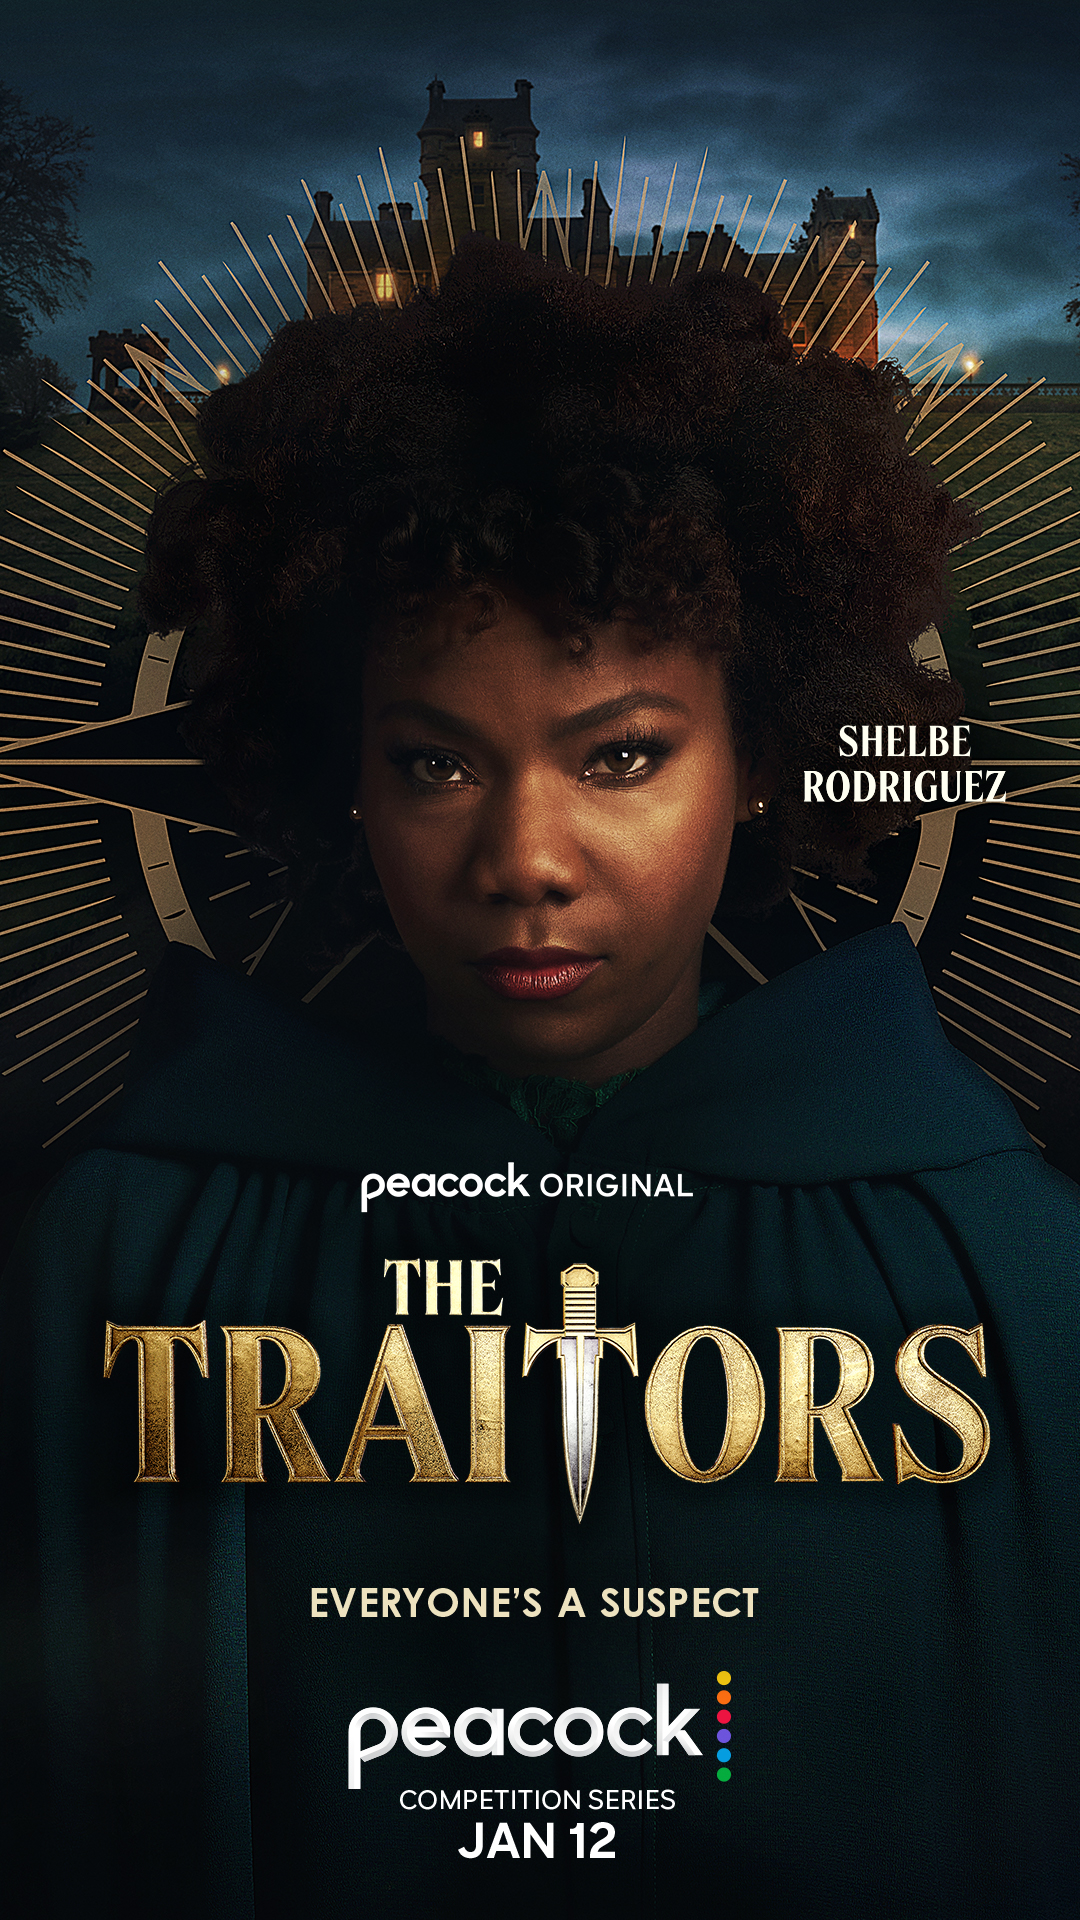 Shelbe Rodriguez for 'The Traitors'